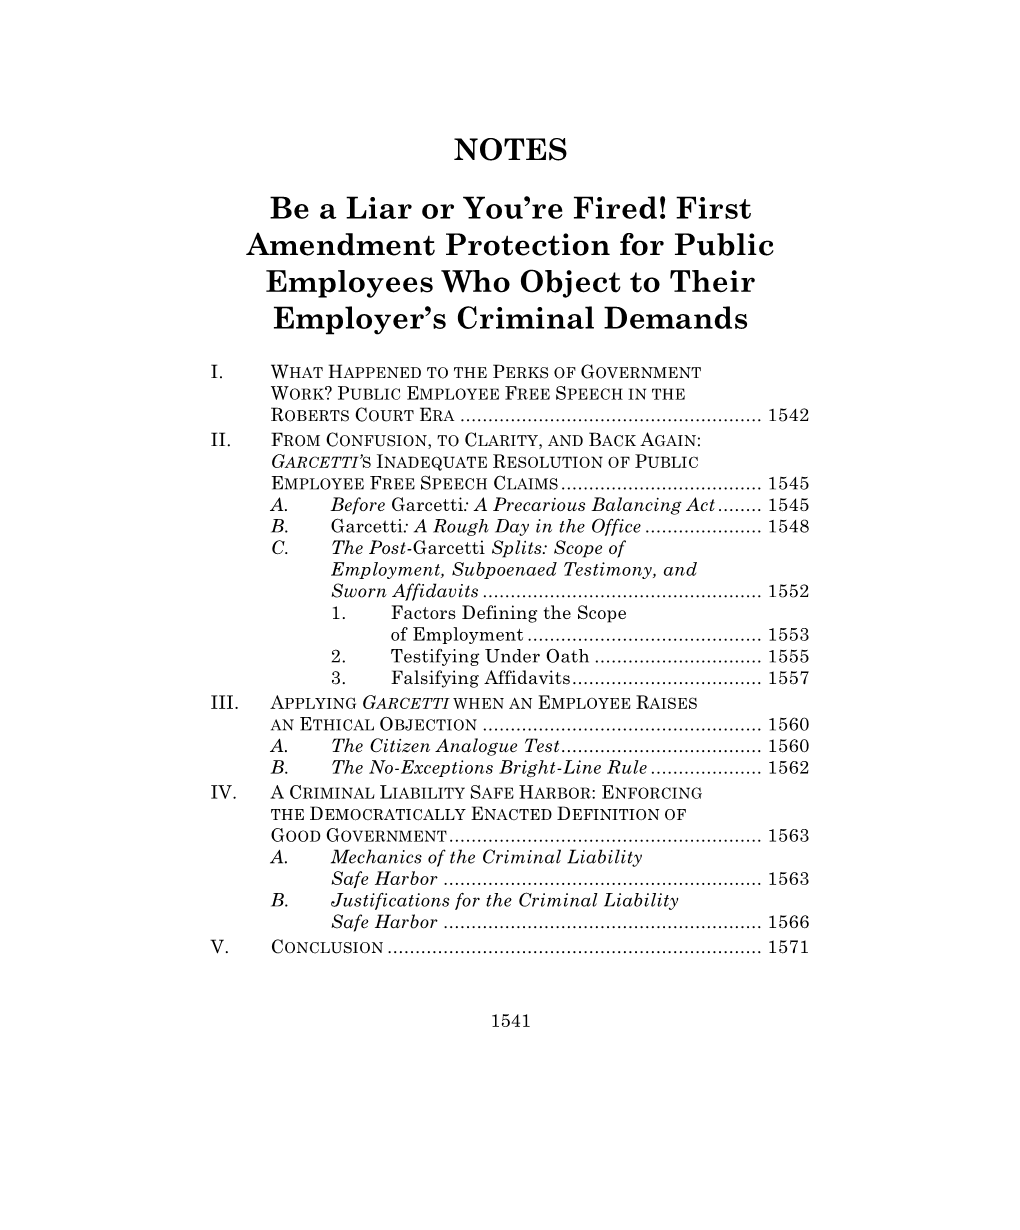 First Amendment Protection for Public Employees Who Object to Their Employer’S Criminal Demands